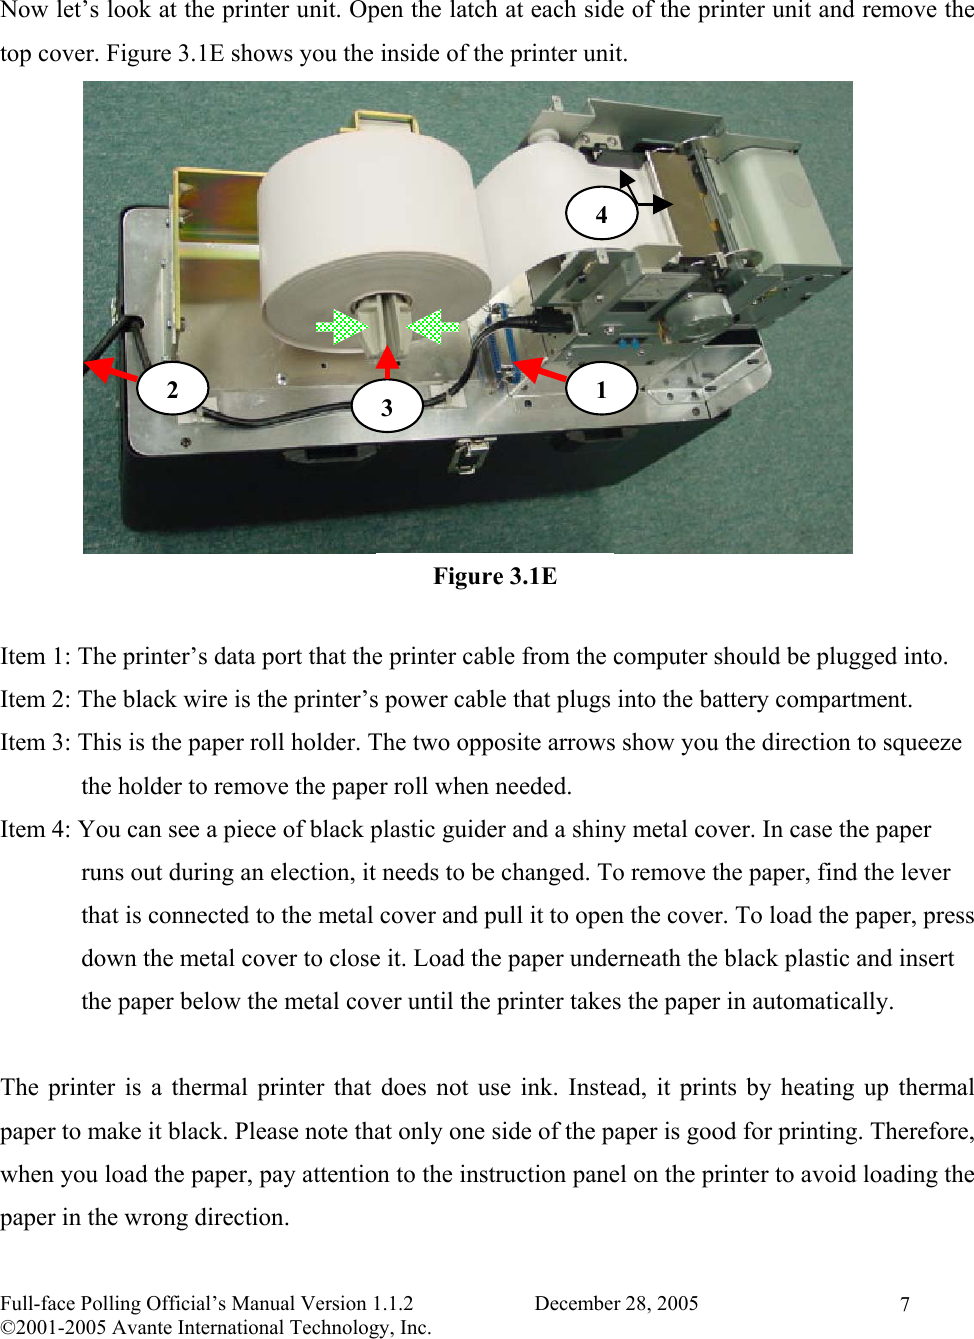    Full-face Polling Official’s Manual Version 1.1.2                       December 28, 2005 ©2001-2005 Avante International Technology, Inc.   7 Now let’s look at the printer unit. Open the latch at each side of the printer unit and remove the top cover. Figure 3.1E shows you the inside of the printer unit.              Item 1: The printer’s data port that the printer cable from the computer should be plugged into. Item 2: The black wire is the printer’s power cable that plugs into the battery compartment. Item 3: This is the paper roll holder. The two opposite arrows show you the direction to squeeze               the holder to remove the paper roll when needed.  Item 4: You can see a piece of black plastic guider and a shiny metal cover. In case the paper               runs out during an election, it needs to be changed. To remove the paper, find the lever               that is connected to the metal cover and pull it to open the cover. To load the paper, press               down the metal cover to close it. Load the paper underneath the black plastic and insert               the paper below the metal cover until the printer takes the paper in automatically.   The printer is a thermal printer that does not use ink. Instead, it prints by heating up thermal paper to make it black. Please note that only one side of the paper is good for printing. Therefore, when you load the paper, pay attention to the instruction panel on the printer to avoid loading the paper in the wrong direction. Figure 3.1E 12  34